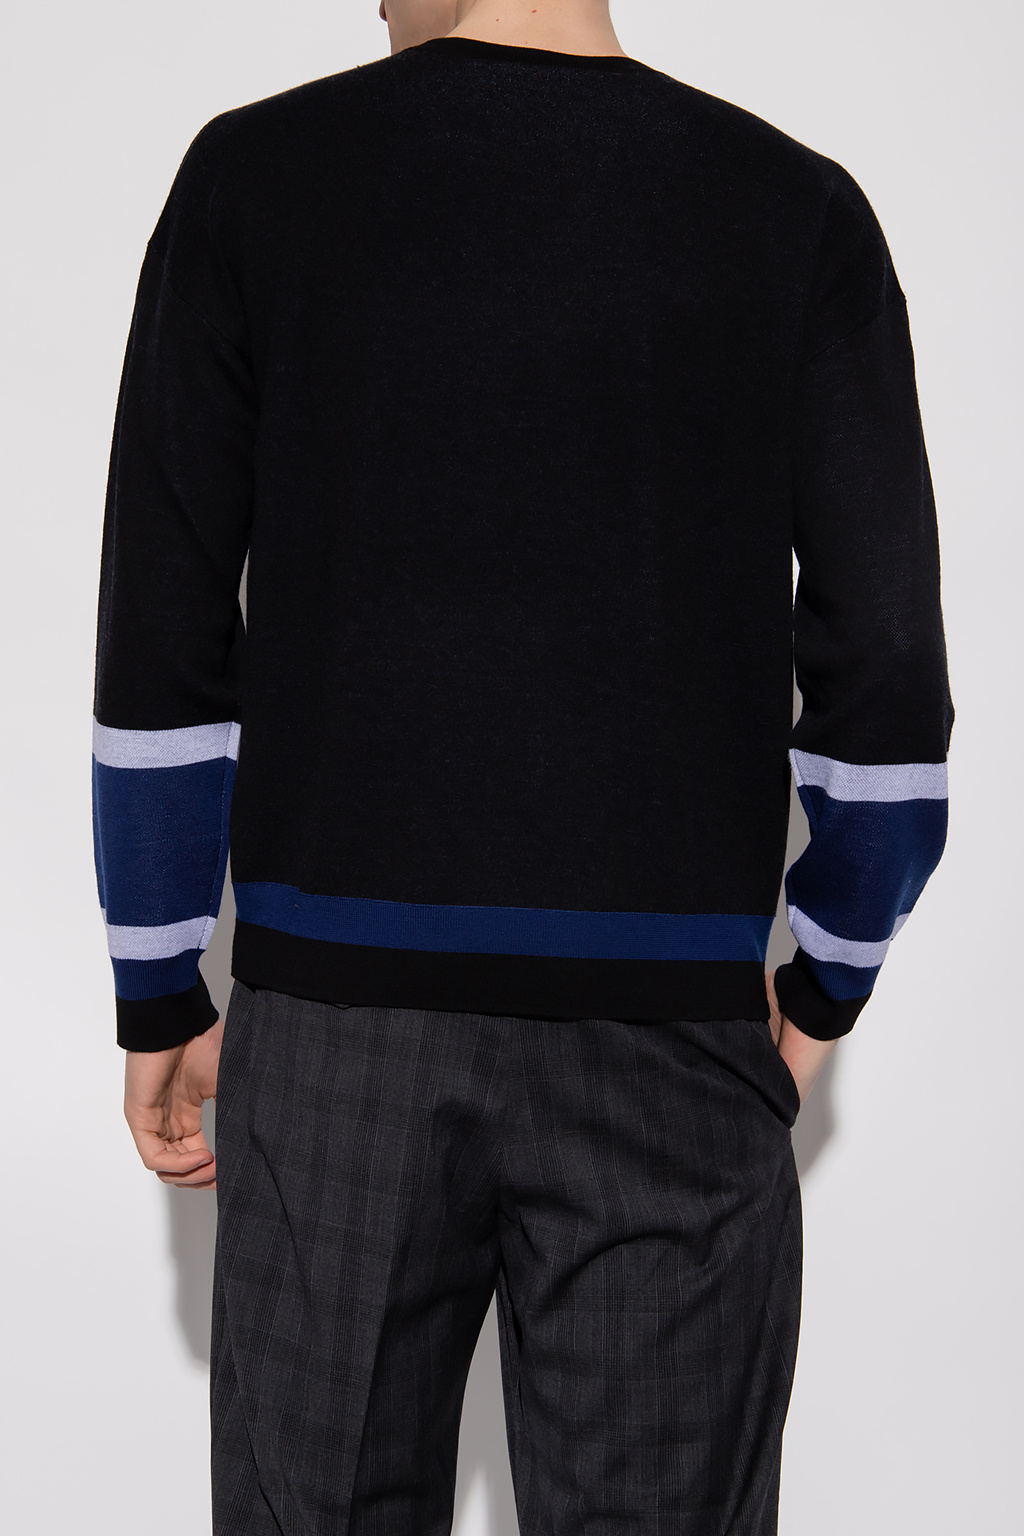 Emporio Armani ‘Sustainable’ collection wool sweater